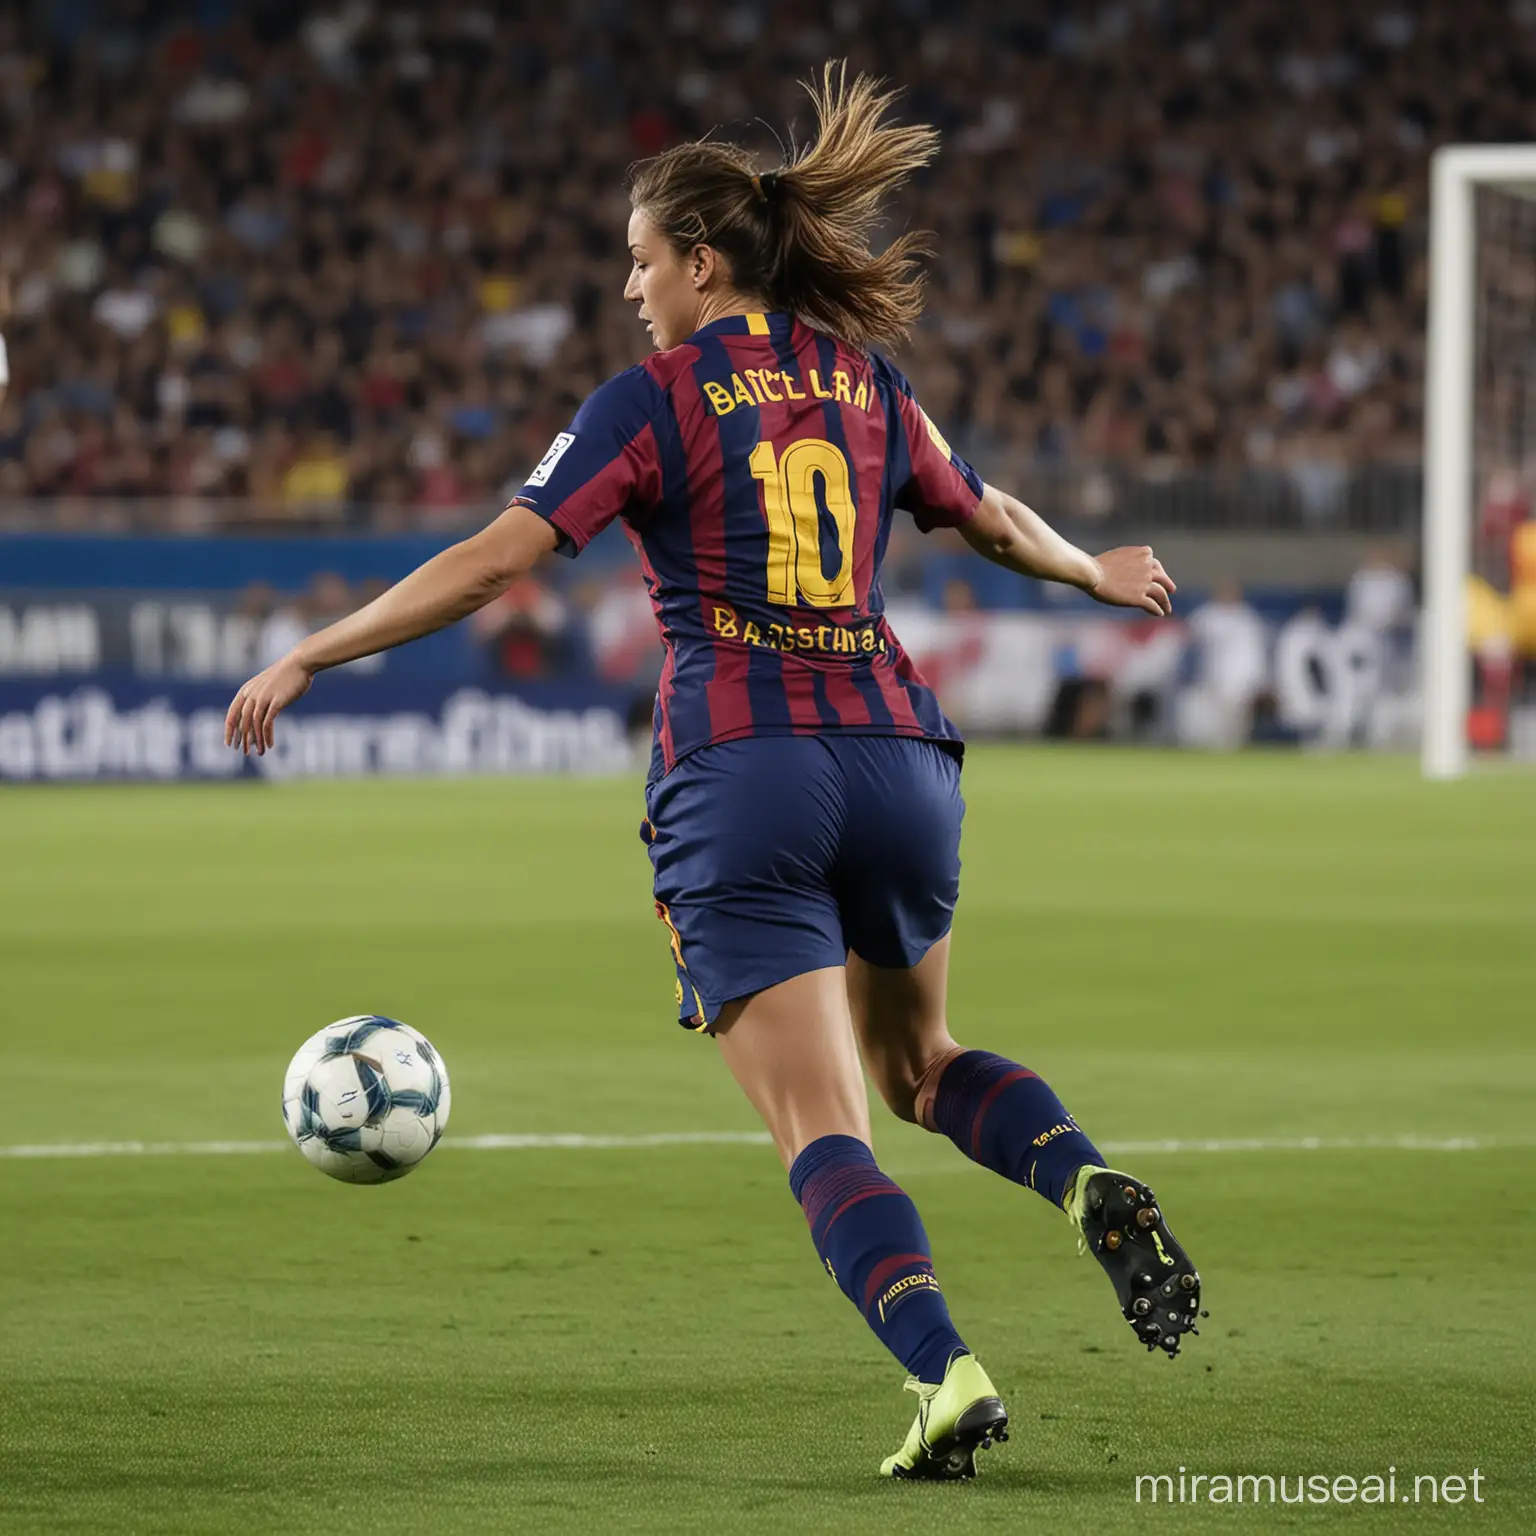 Female Football Player from Barcelona in Action Kick